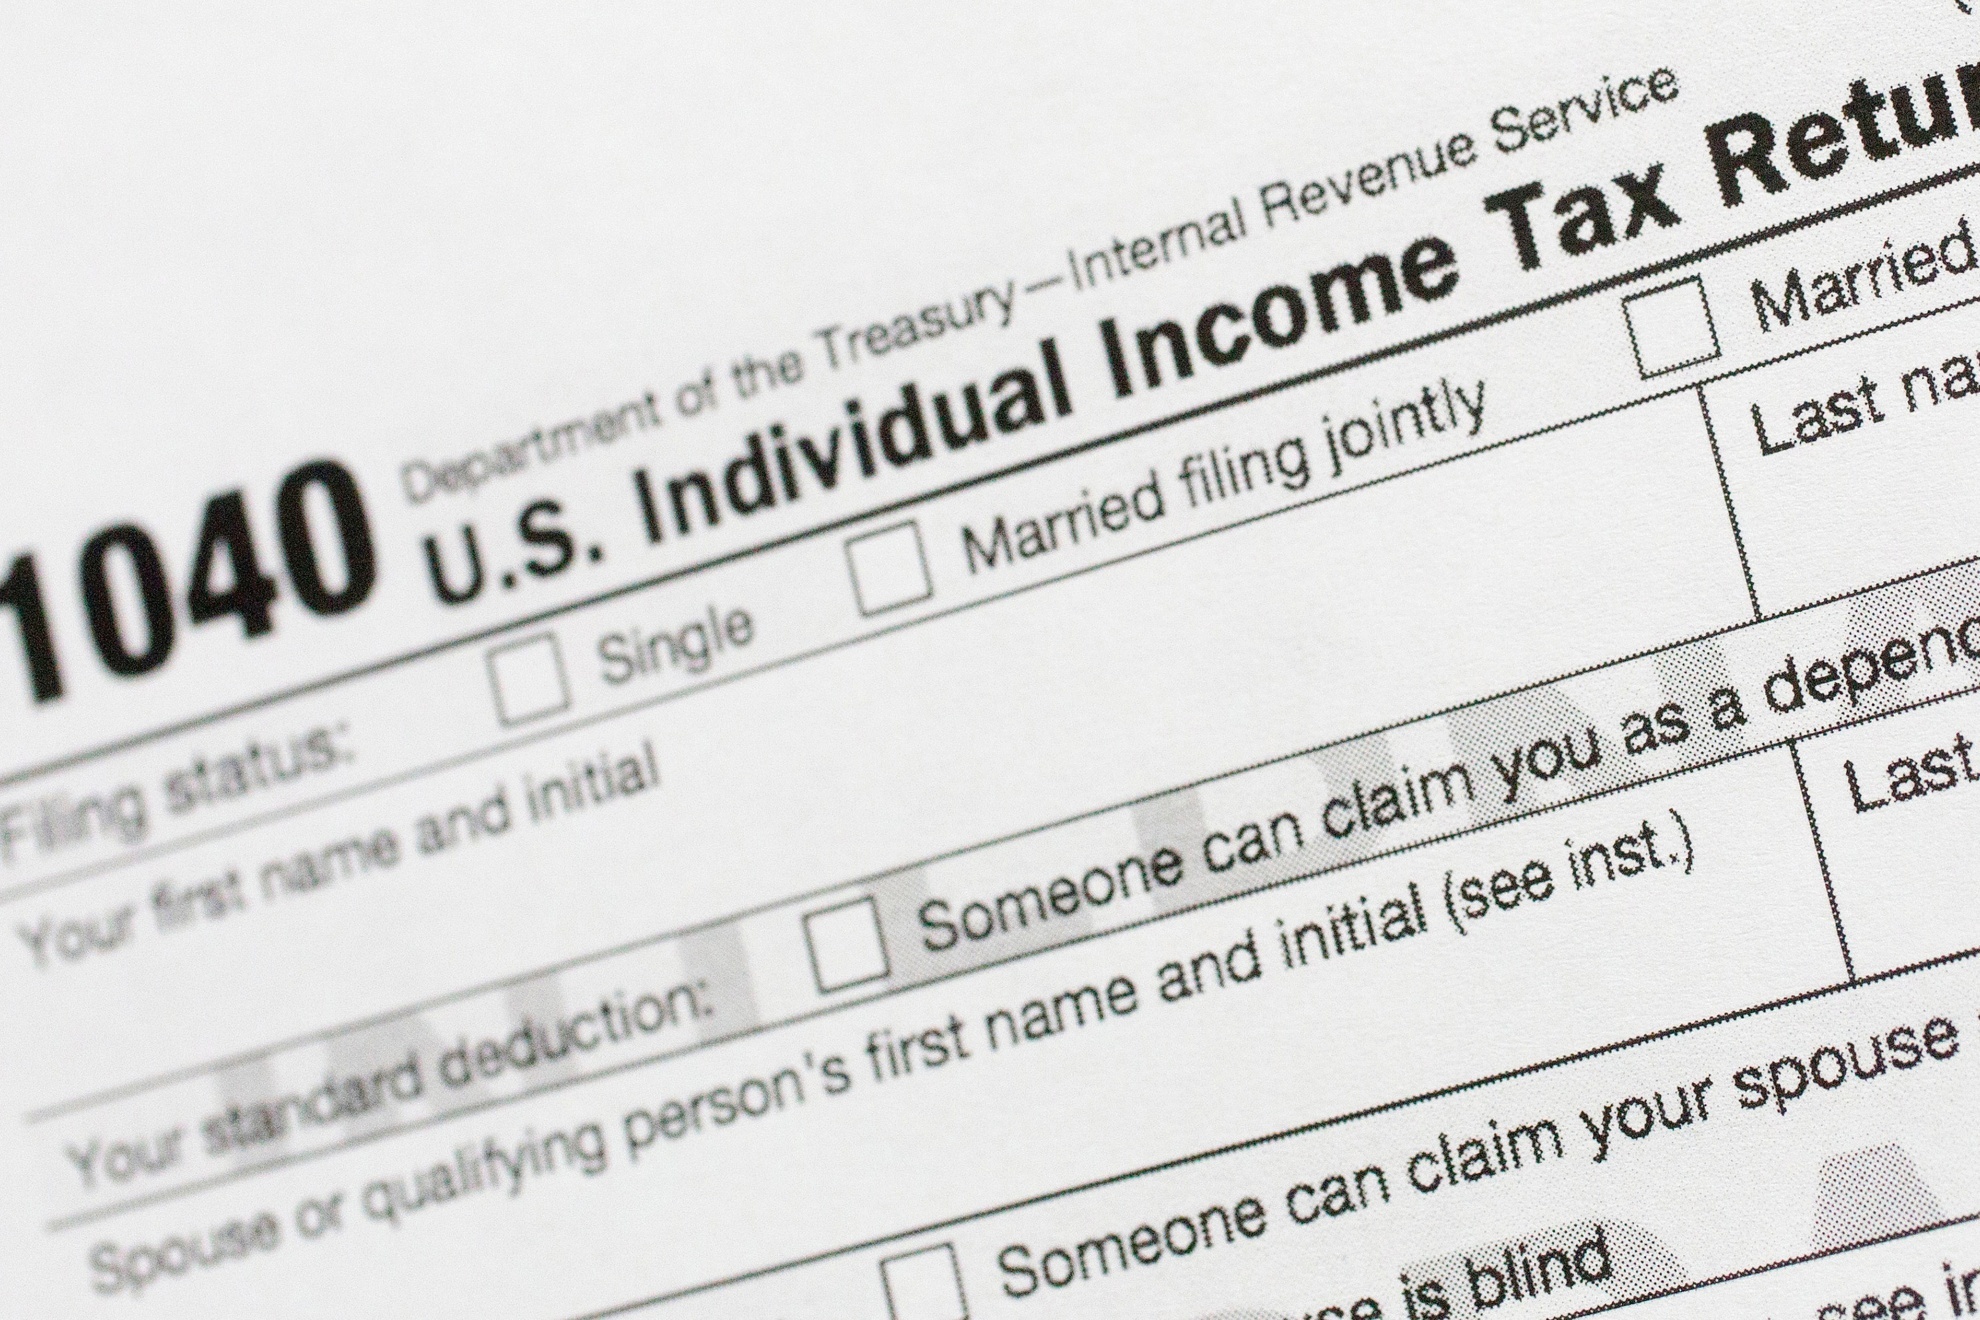 Image of a Form 1040